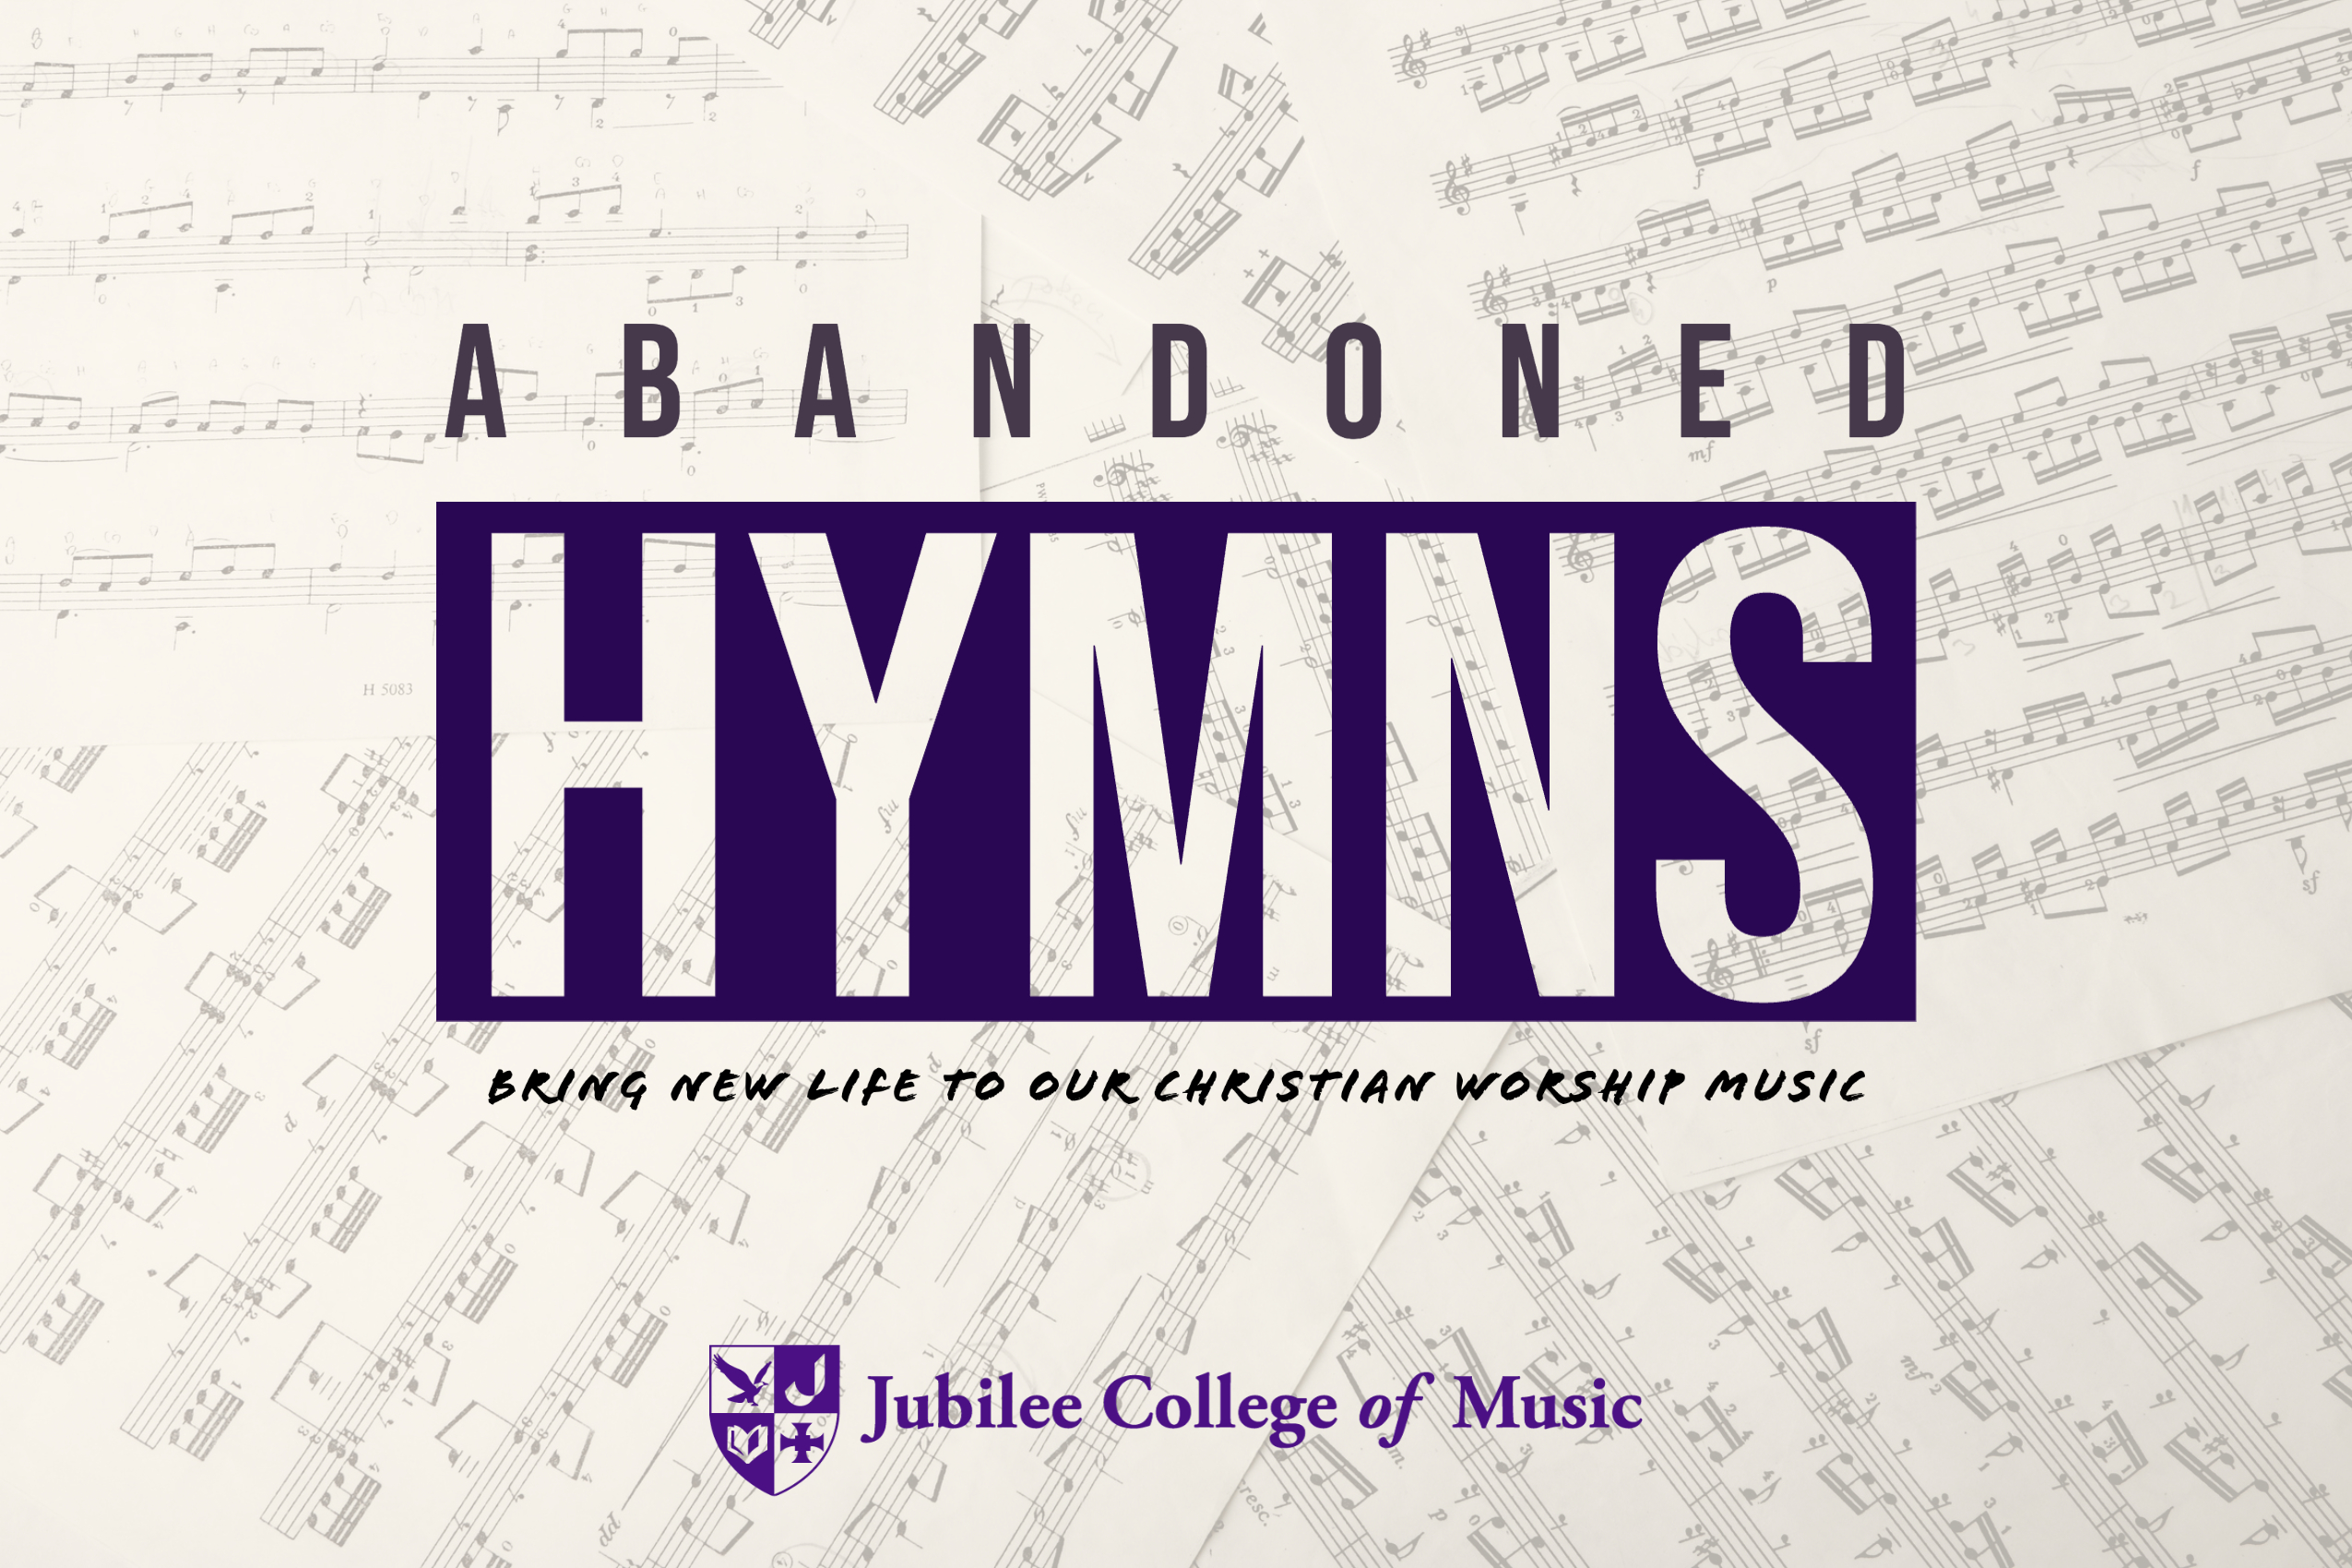 olivet-university-abandoned-hymns-bring-new-life-to-our-christian-worship-music